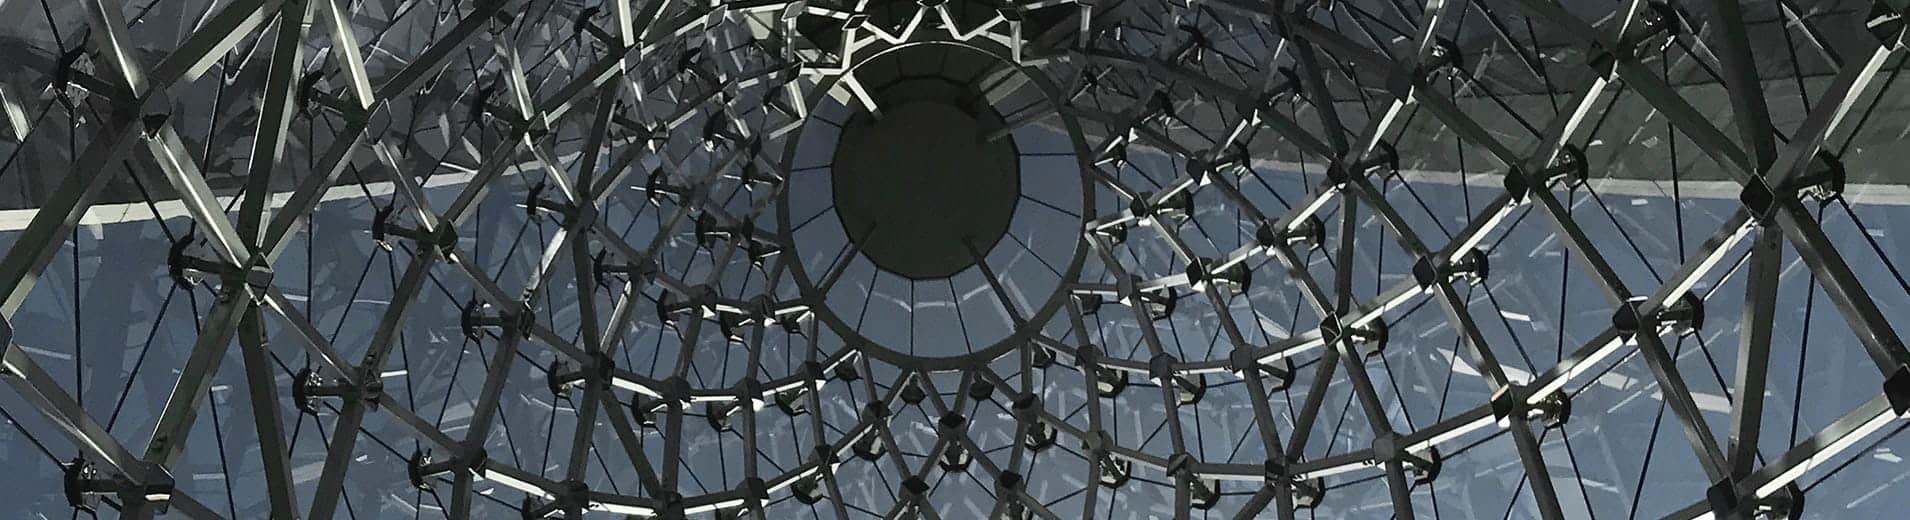 Abstract_Ceiling_Structure_P_0605_1910x520